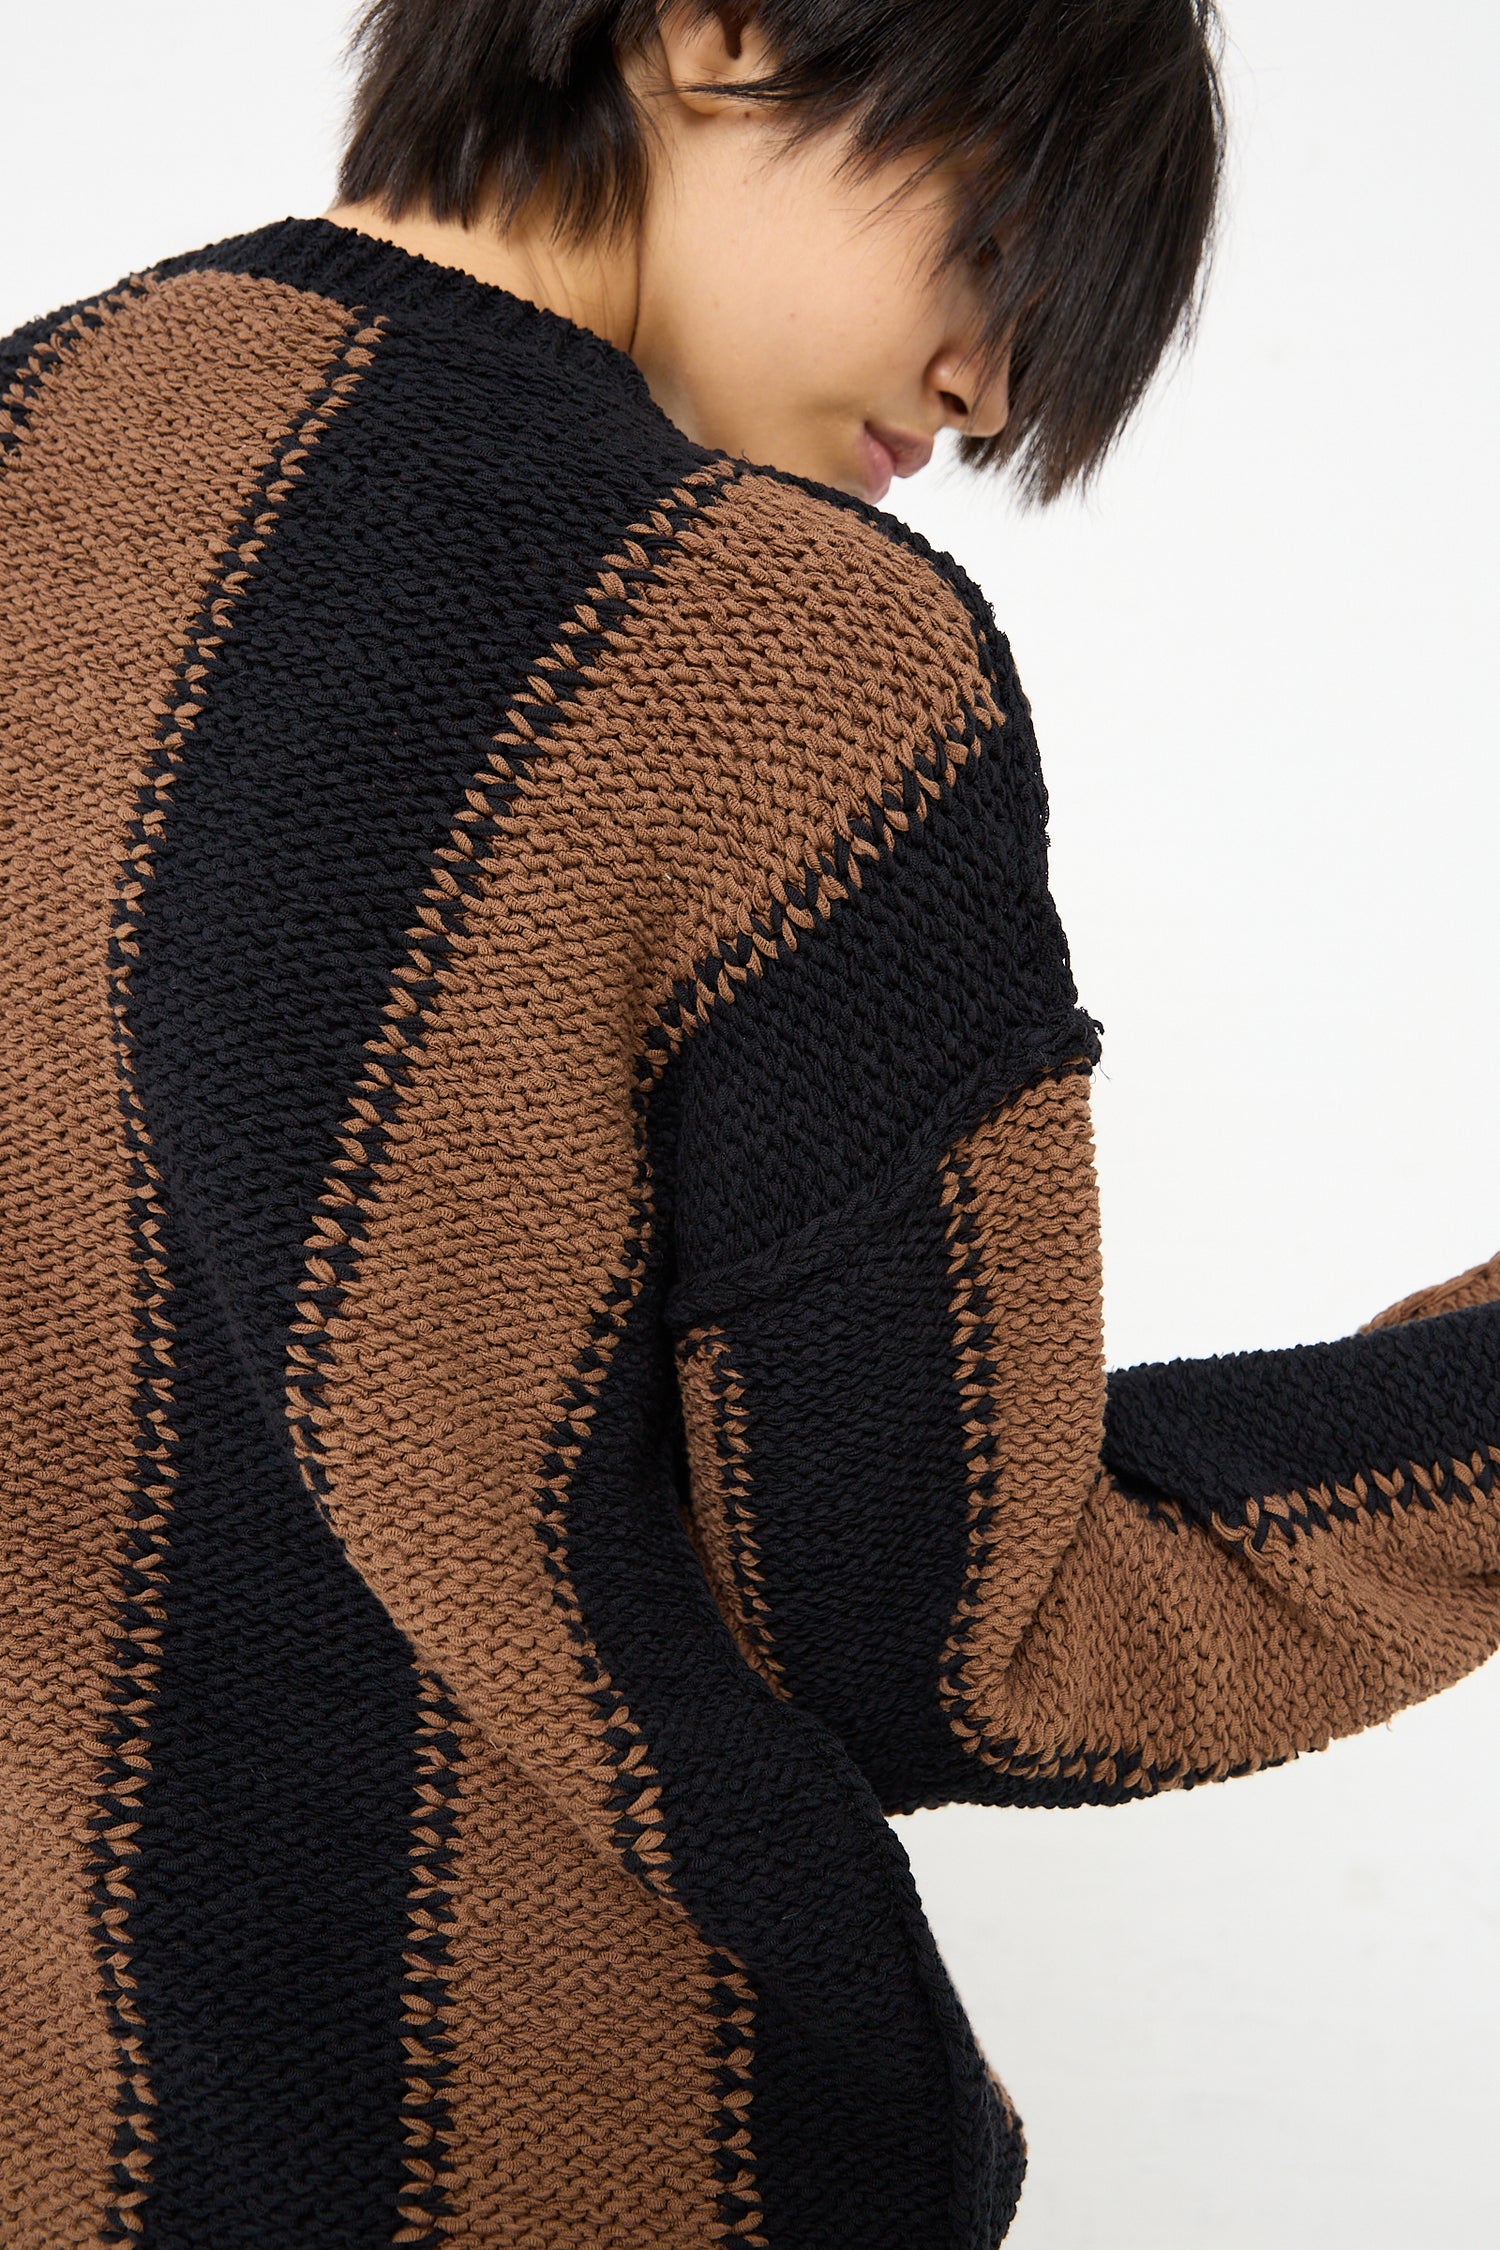 A woman wearing a Cristaseya Fettuccia Striped Sweater in Black and Noisette (Brown). Back view.